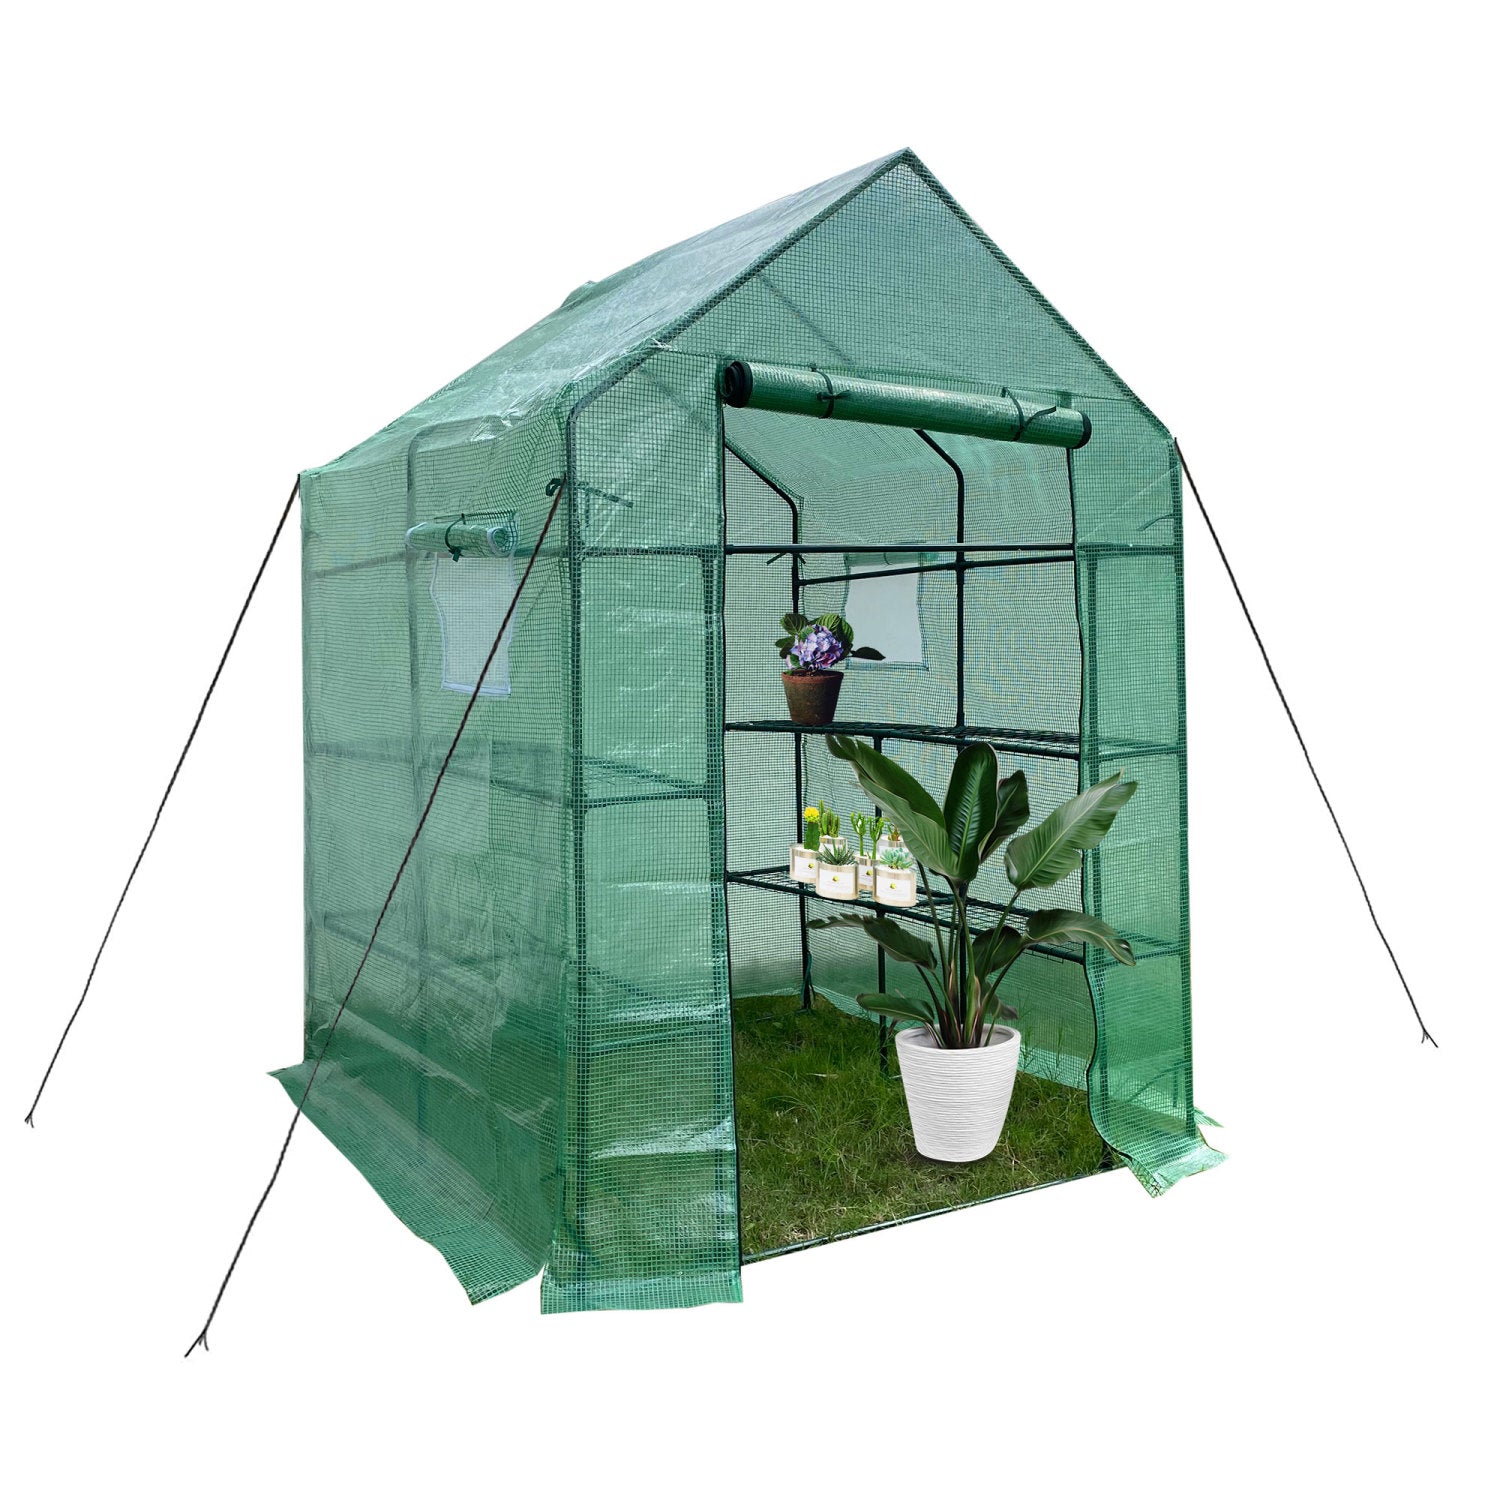 SUGIFT Greenhouse for Walk-in Plant Outdoors with Durable PE Cover, 2 Tiers 8 Shelves,56in W x 56in D x 76in H